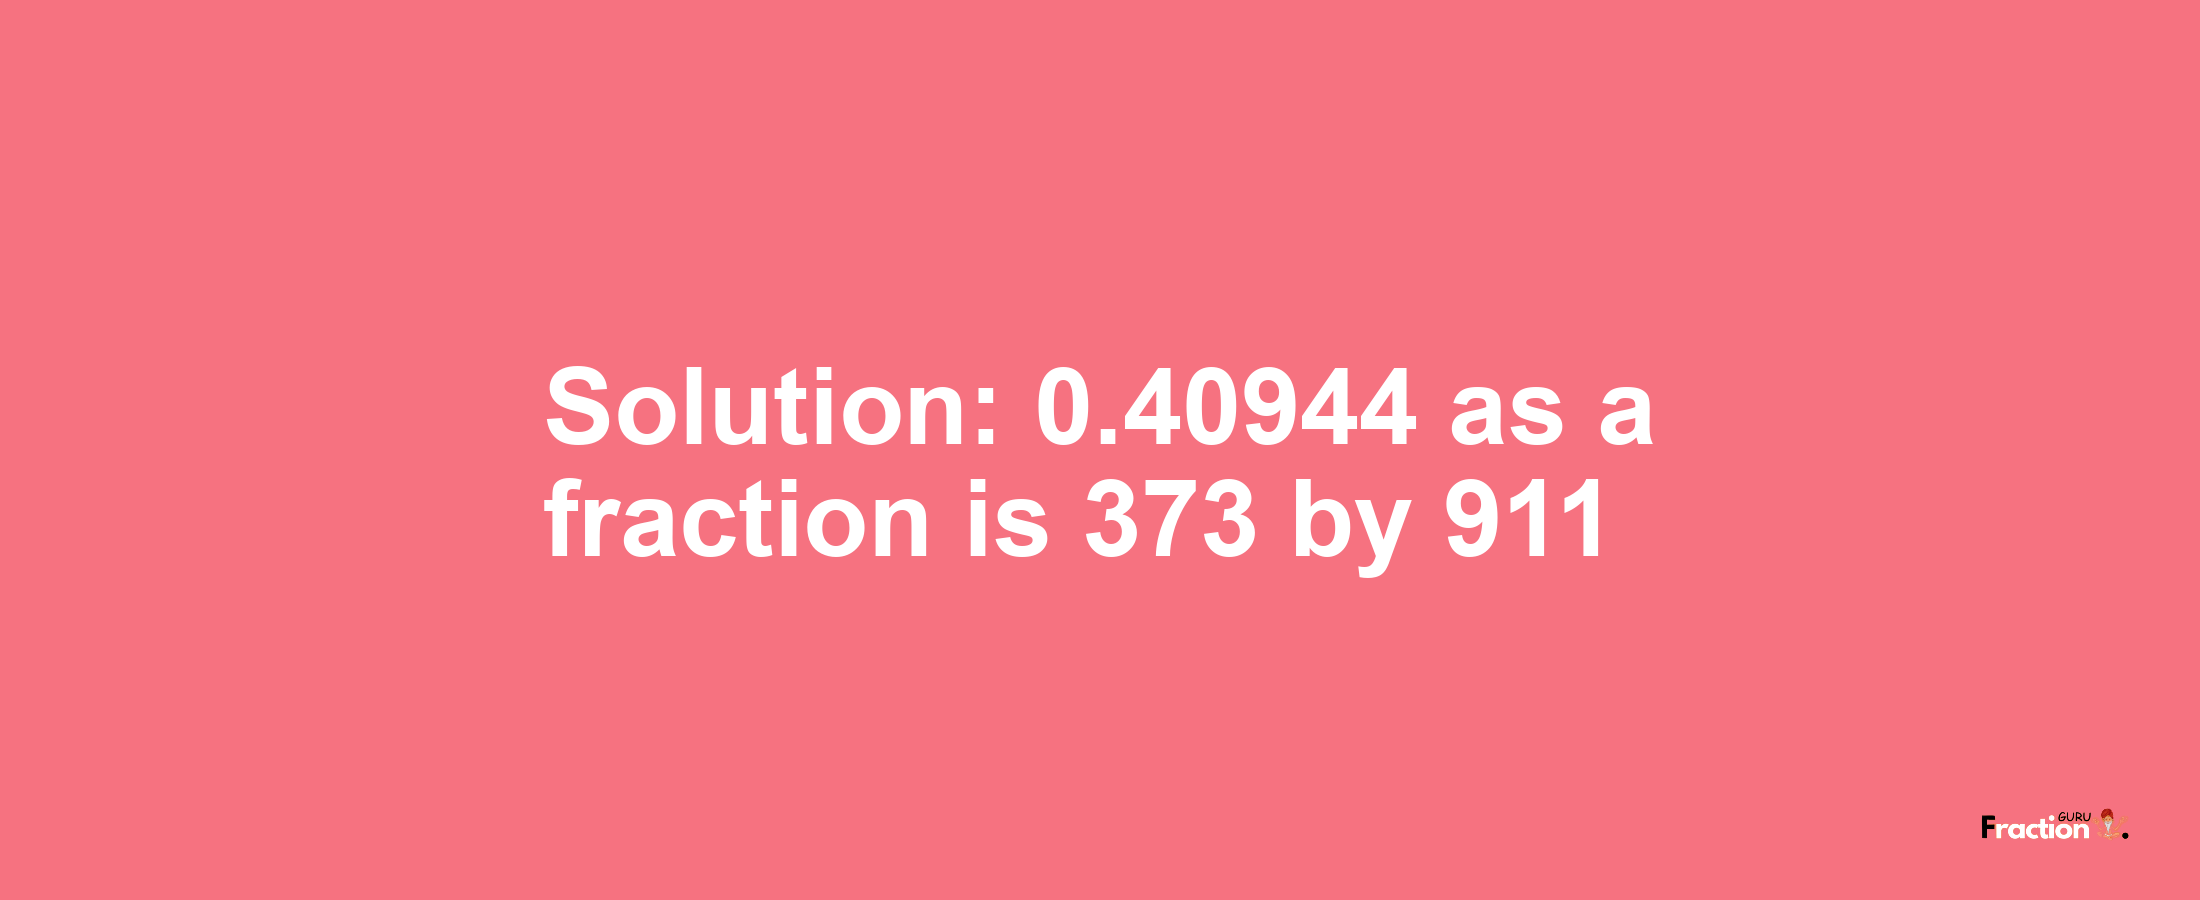 Solution:0.40944 as a fraction is 373/911